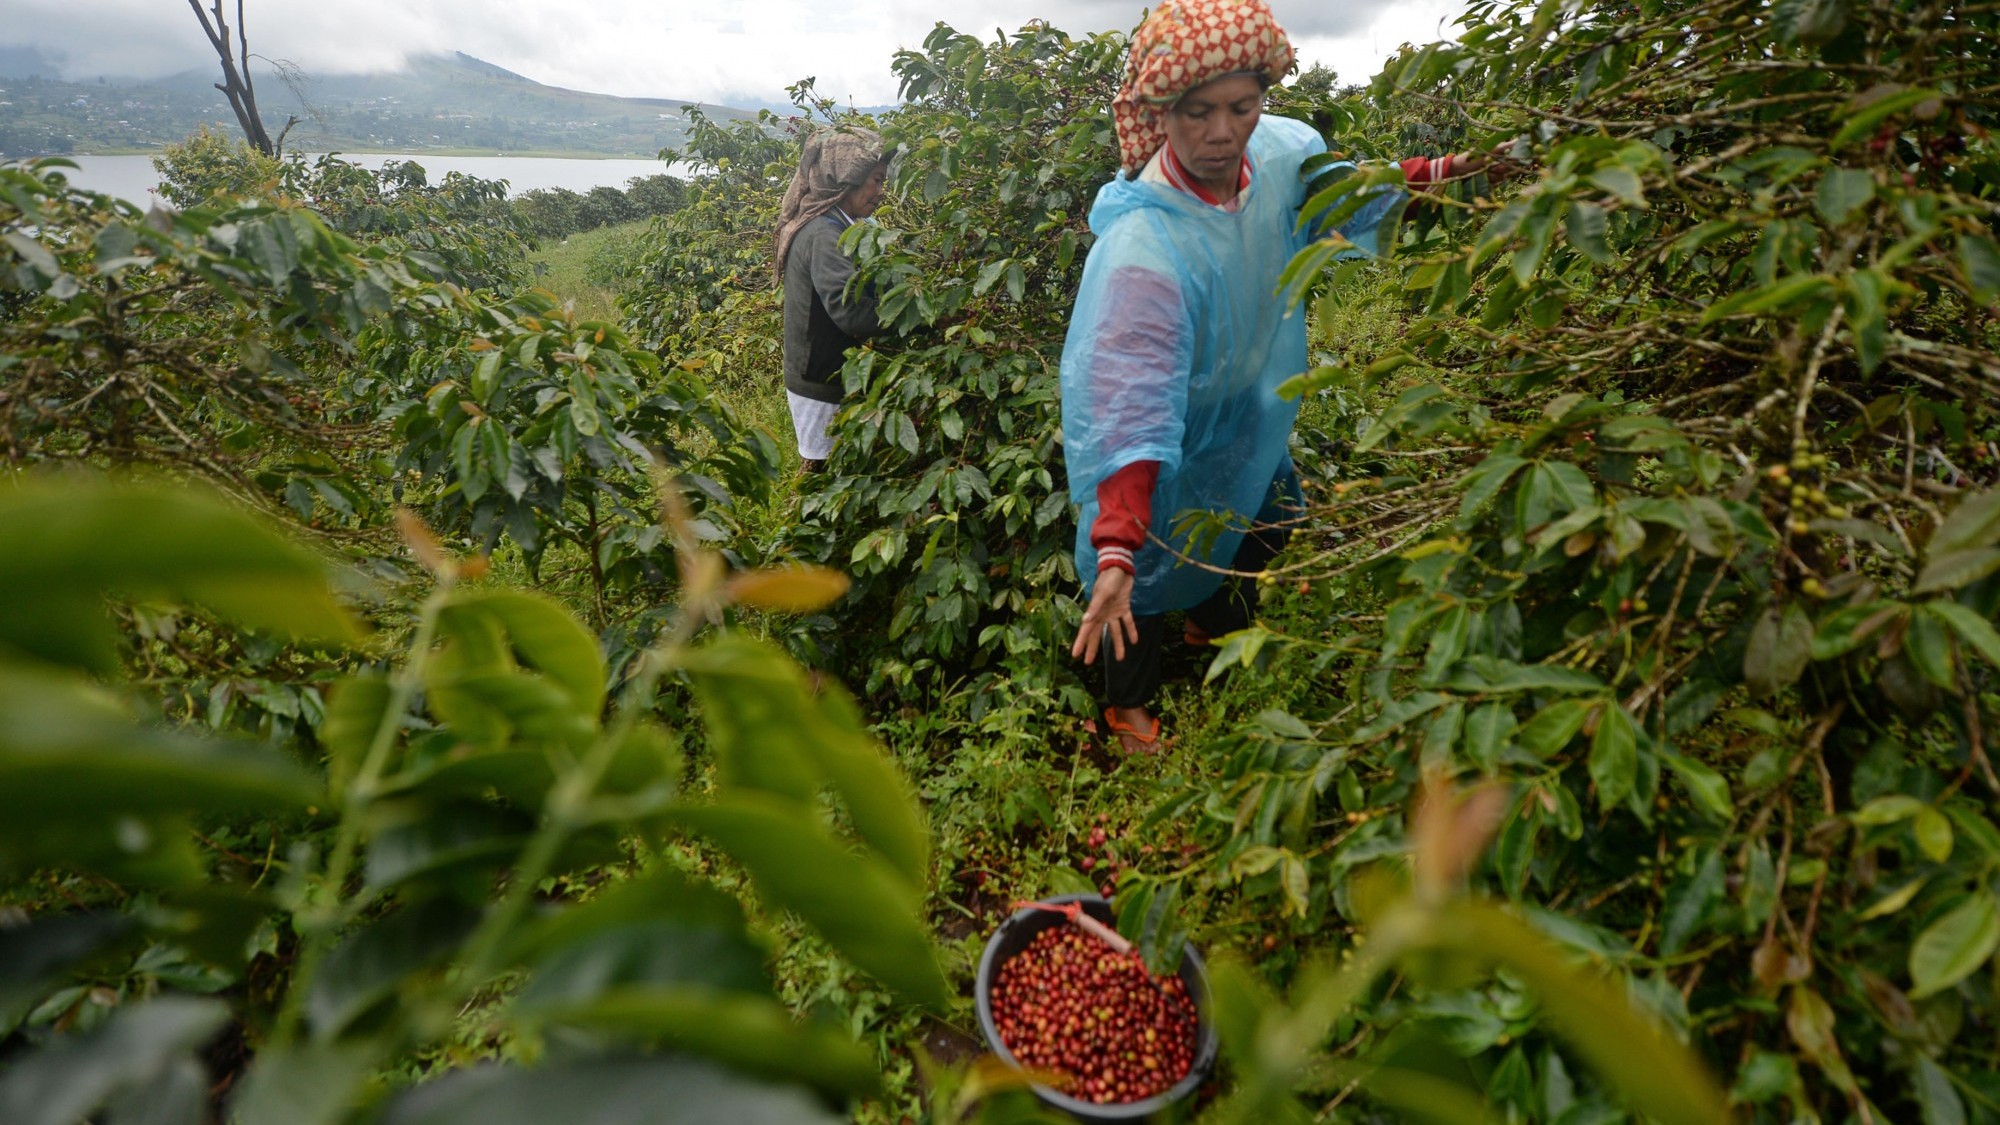 An employee harvests Arabica coffee cherries at the Solok Radjo Cooperative coffee farm in Alahan Panjang, West Sumatra, Indonesia, on Friday, July 15, 2016. Coffee production in Indonesia will probably drop 10 percent this year after dry weather caused by the worst El Nino in almost two decades damaged some crops and delayed the harvest. (Dimas Ardian/Bloomberg via Getty Images)